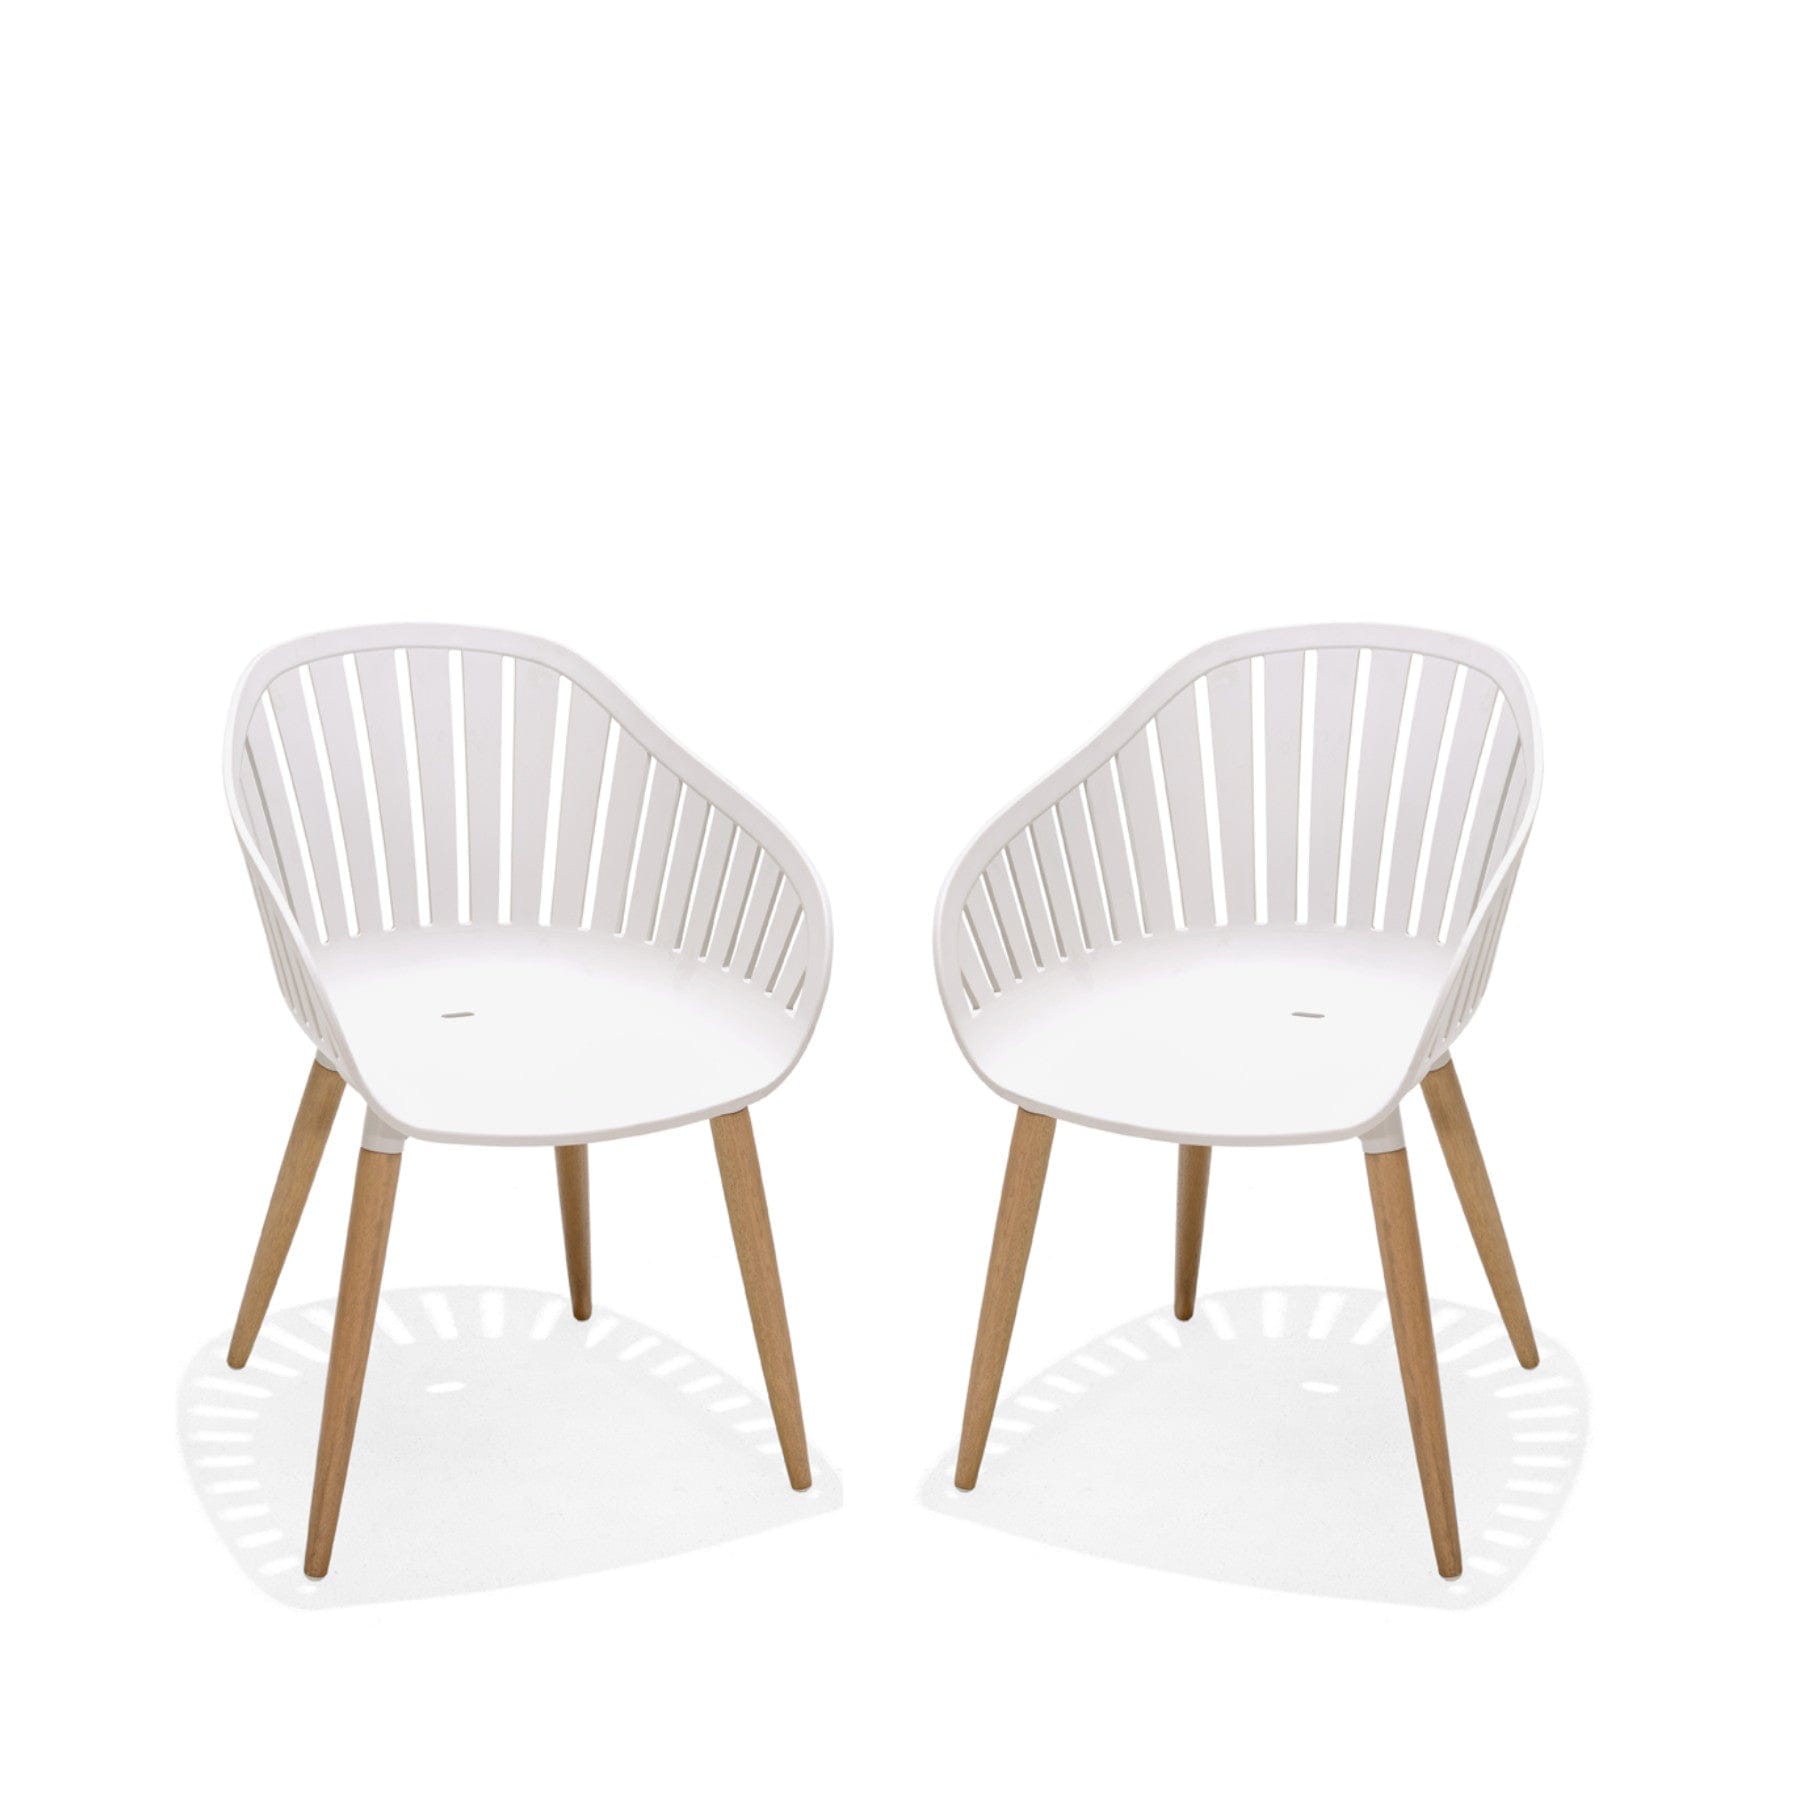 Modern white dining chairs with wooden legs and slatted back design on a white background